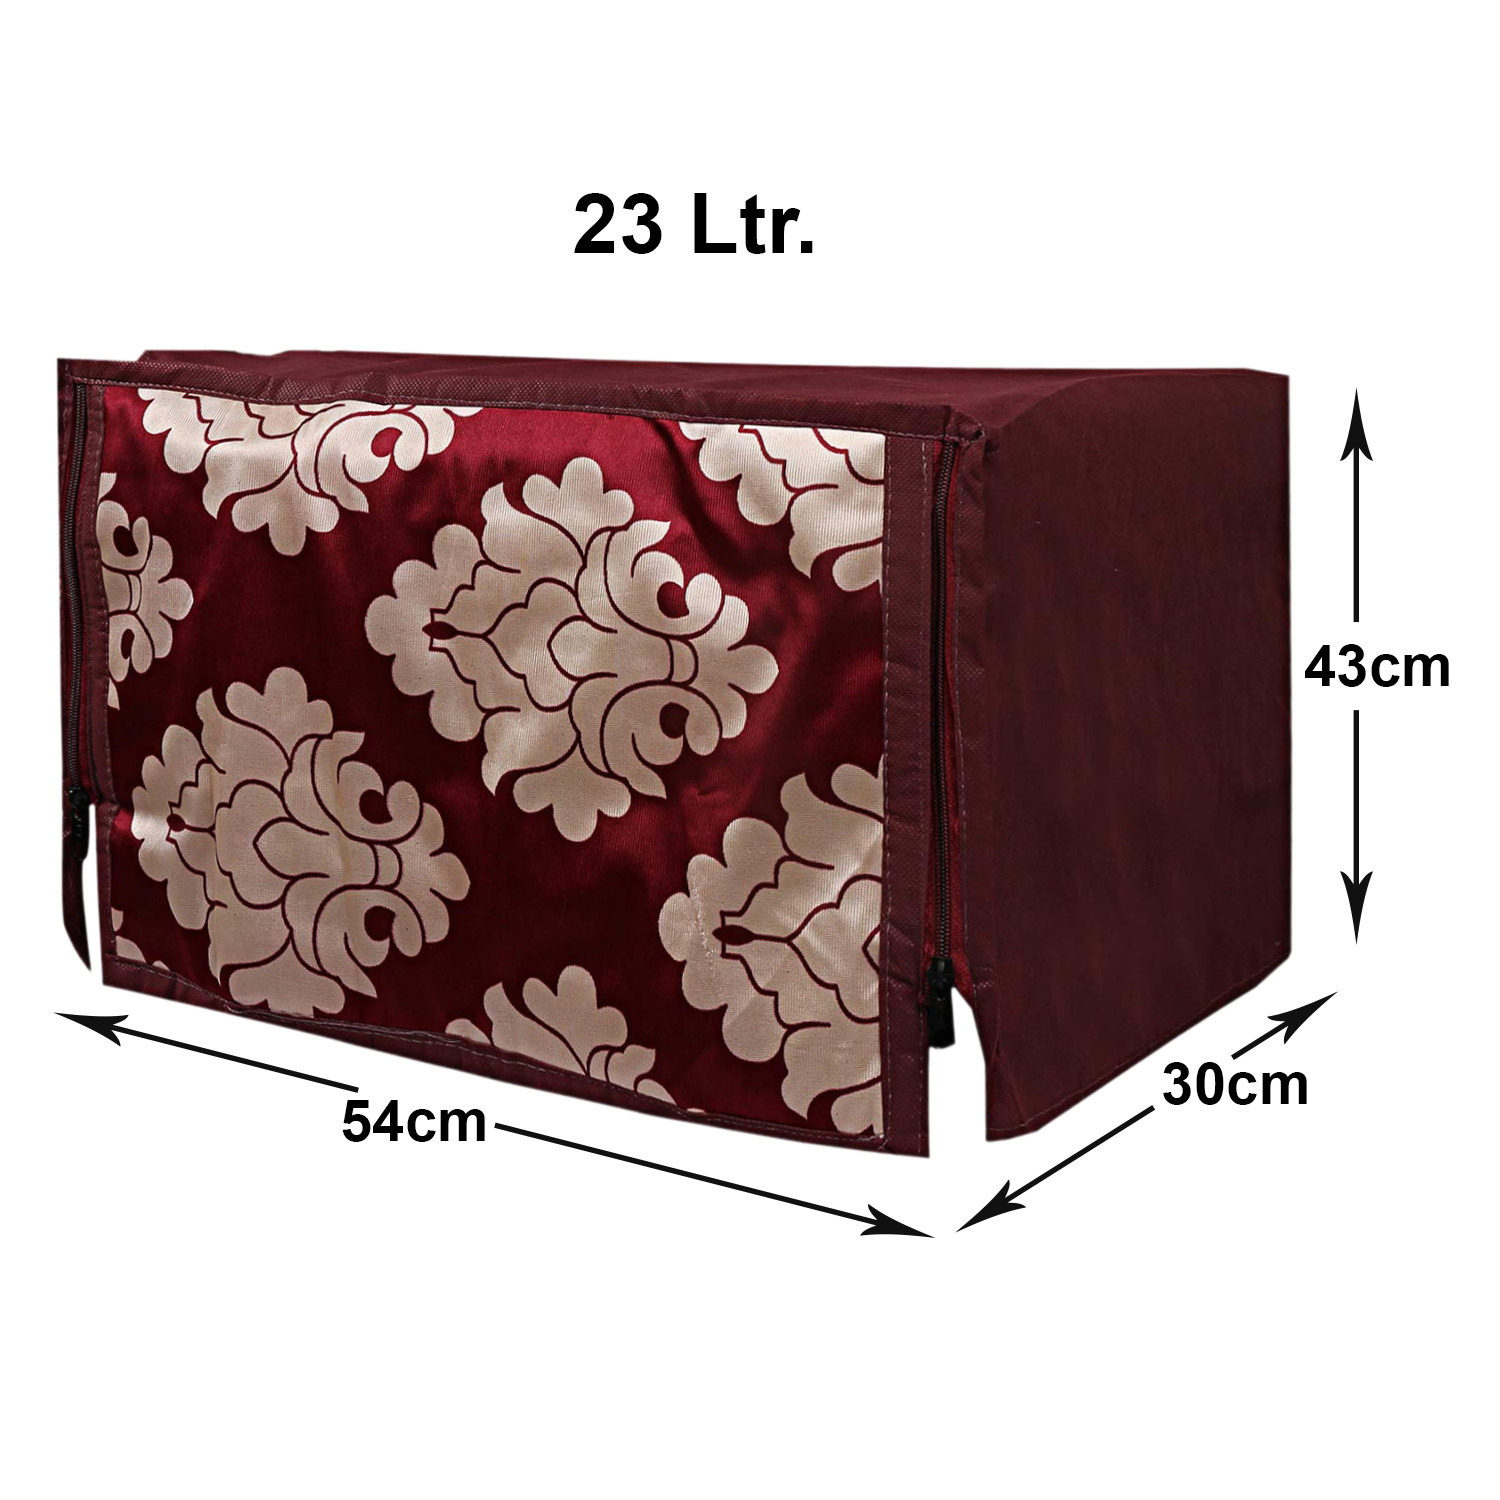 Kuber Industries Multiuses PVC Flower Print Microwave Oven Cover For Home & Kitchen 23 Ltr. (Maroon)